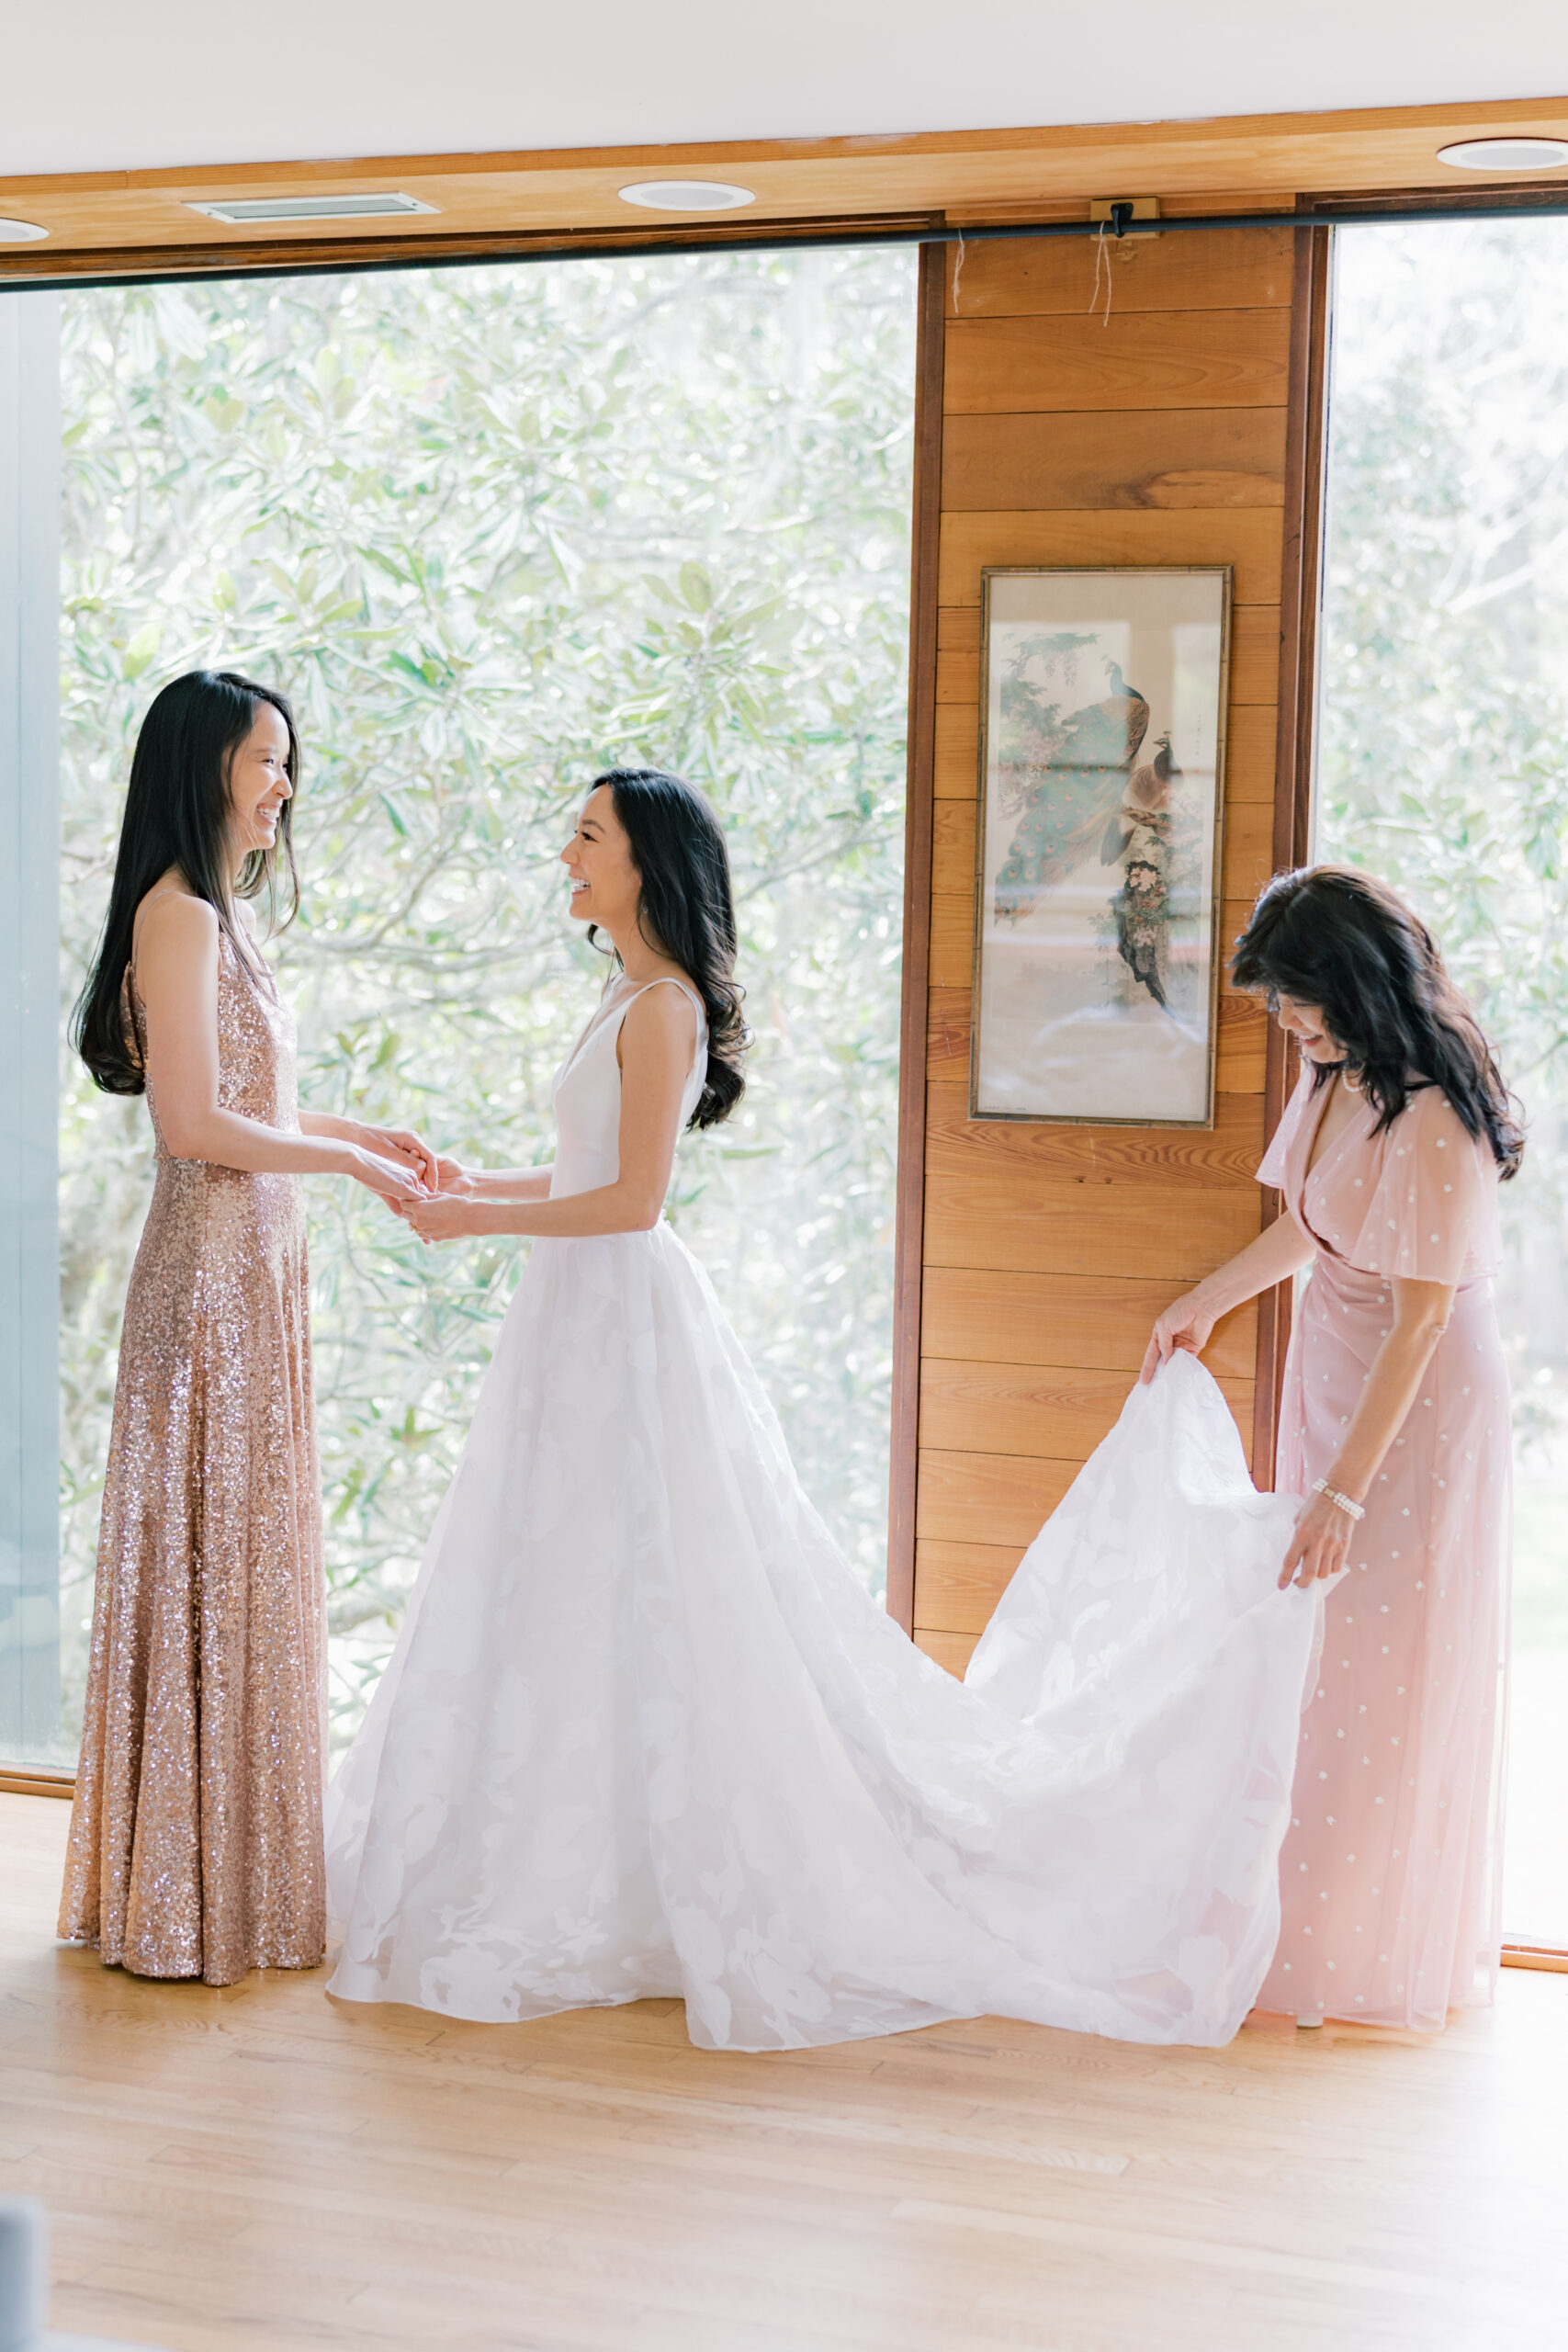 Bride holding hands with her sister while her mom spread out her wedding dress. 